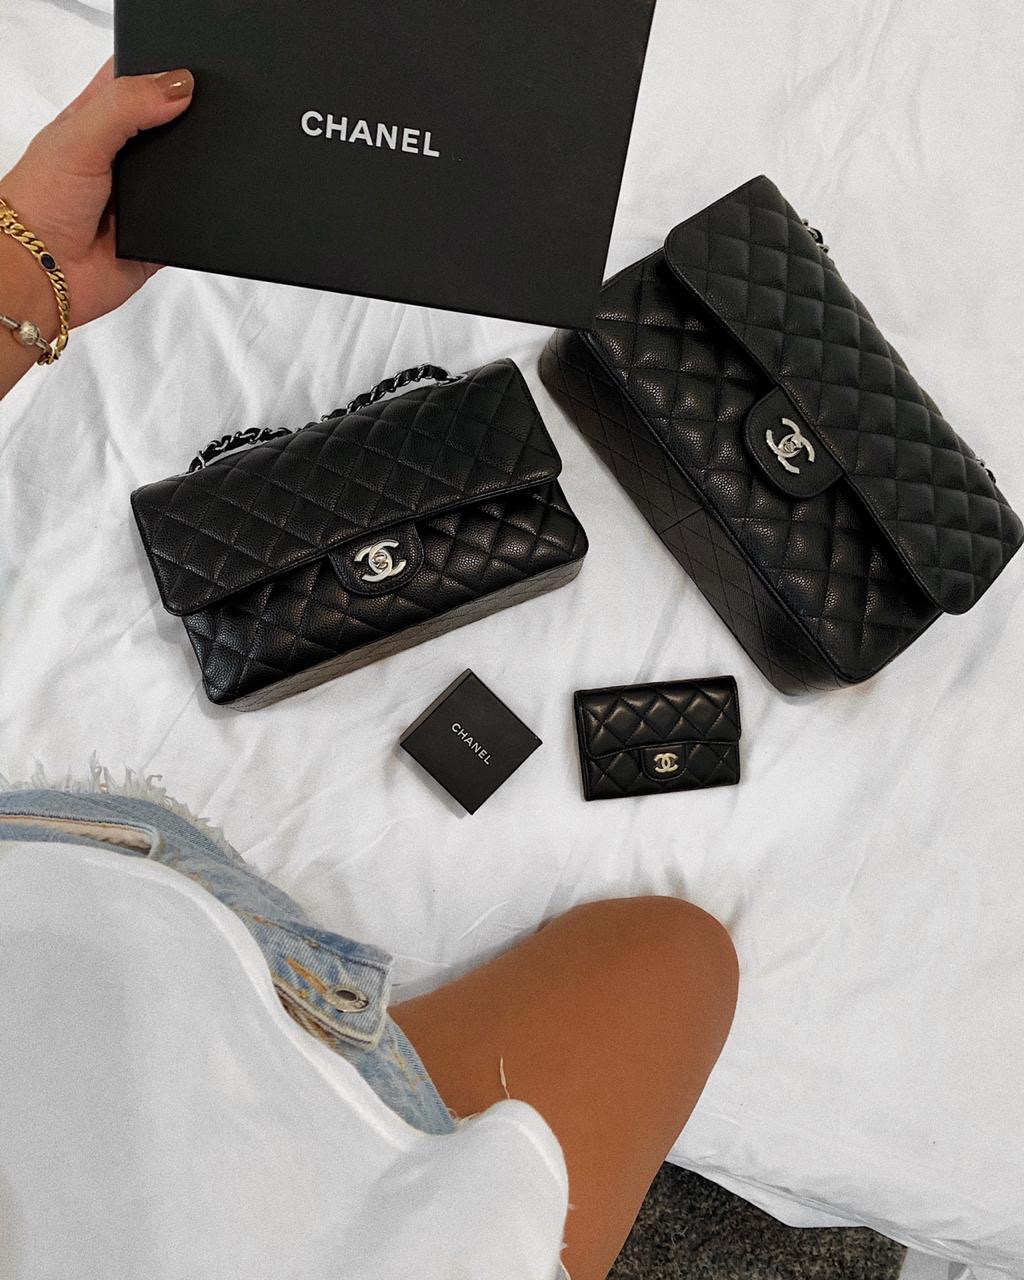 Chanel Classic Bag Price List Guide - Brands Blogger